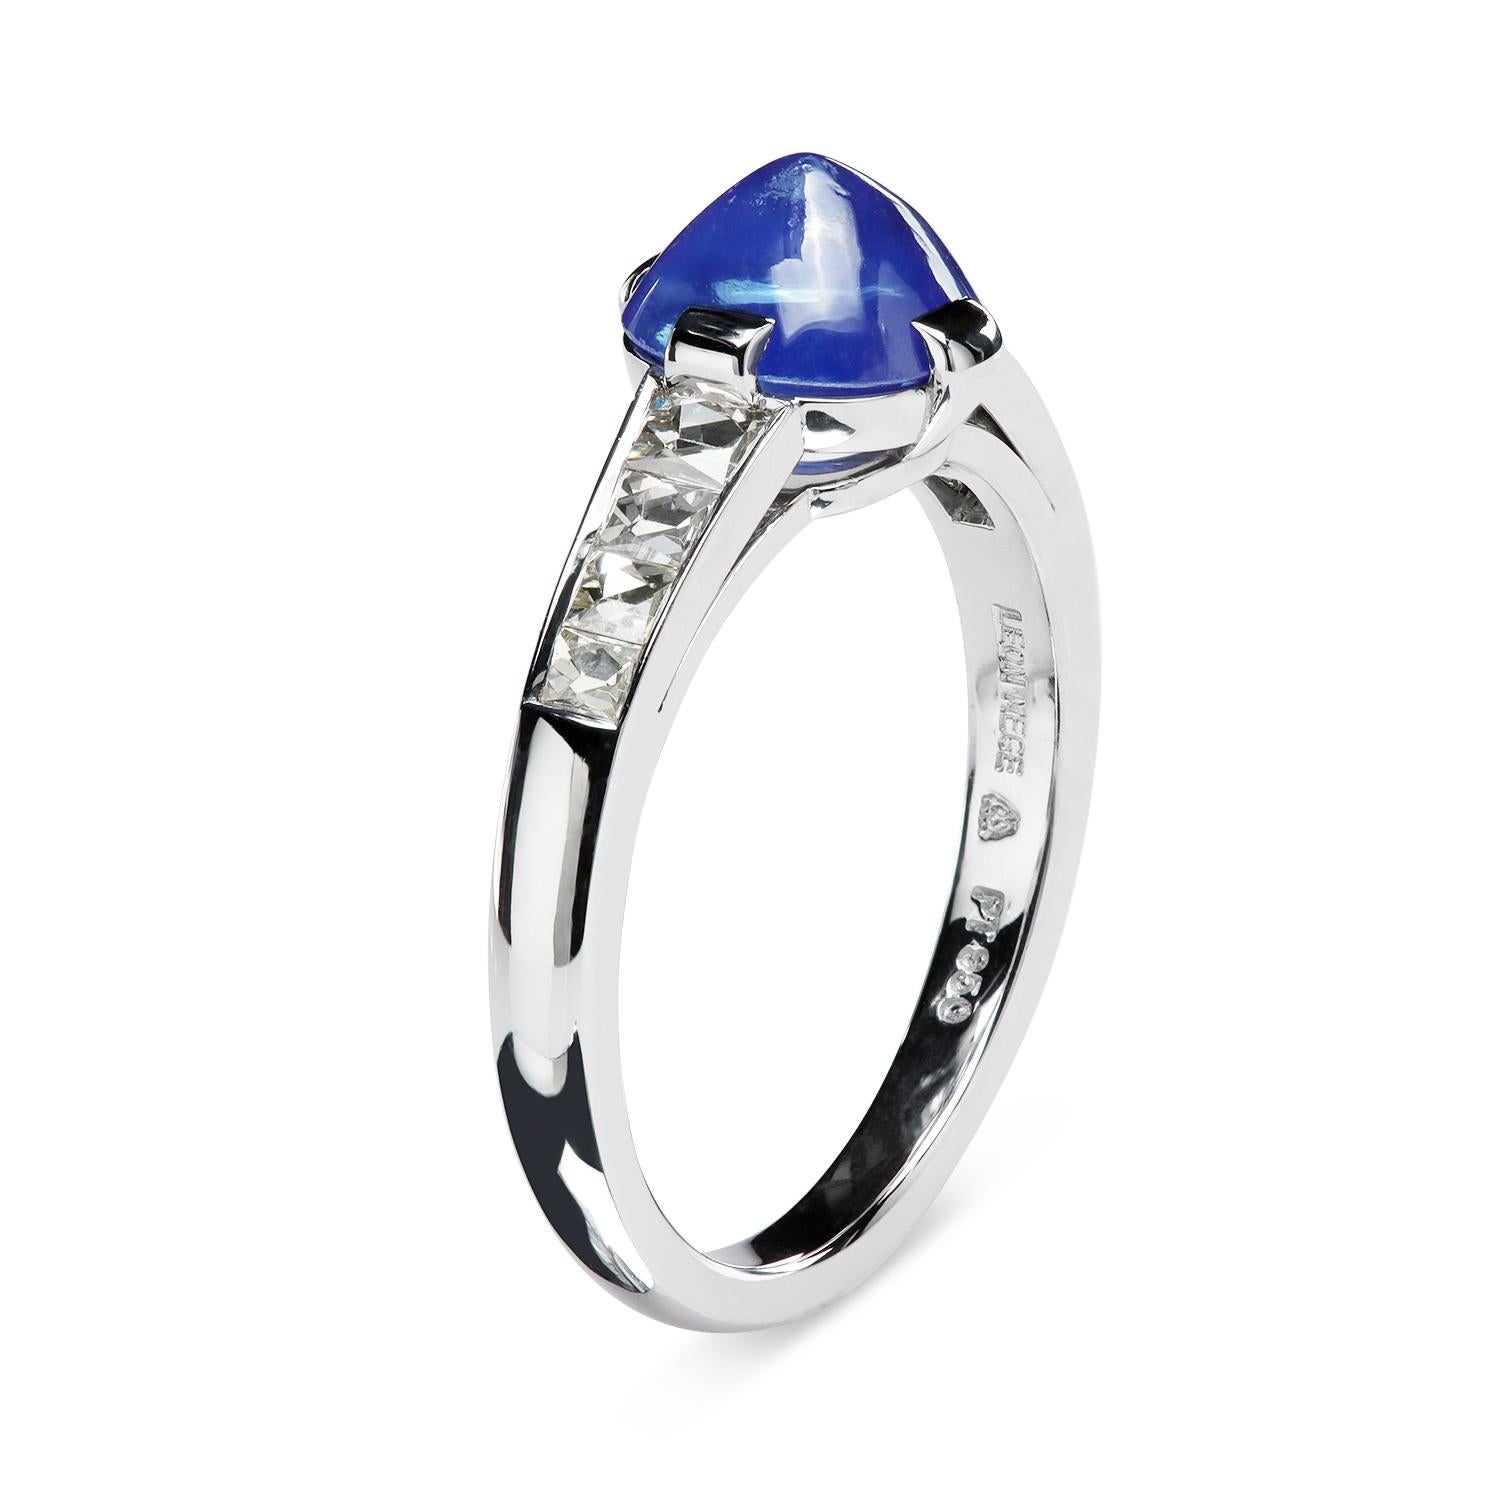 Leon Mege's superb artistry and style are apparent in the vintage-style Art-Deco ring with a dreamy Kashmir sugarloaf cab and channel-set French-cut diamonds.

1.96-carat GRS certified GRS2023-036501 unheated Kashmir sapphire cab
0.38 carats total